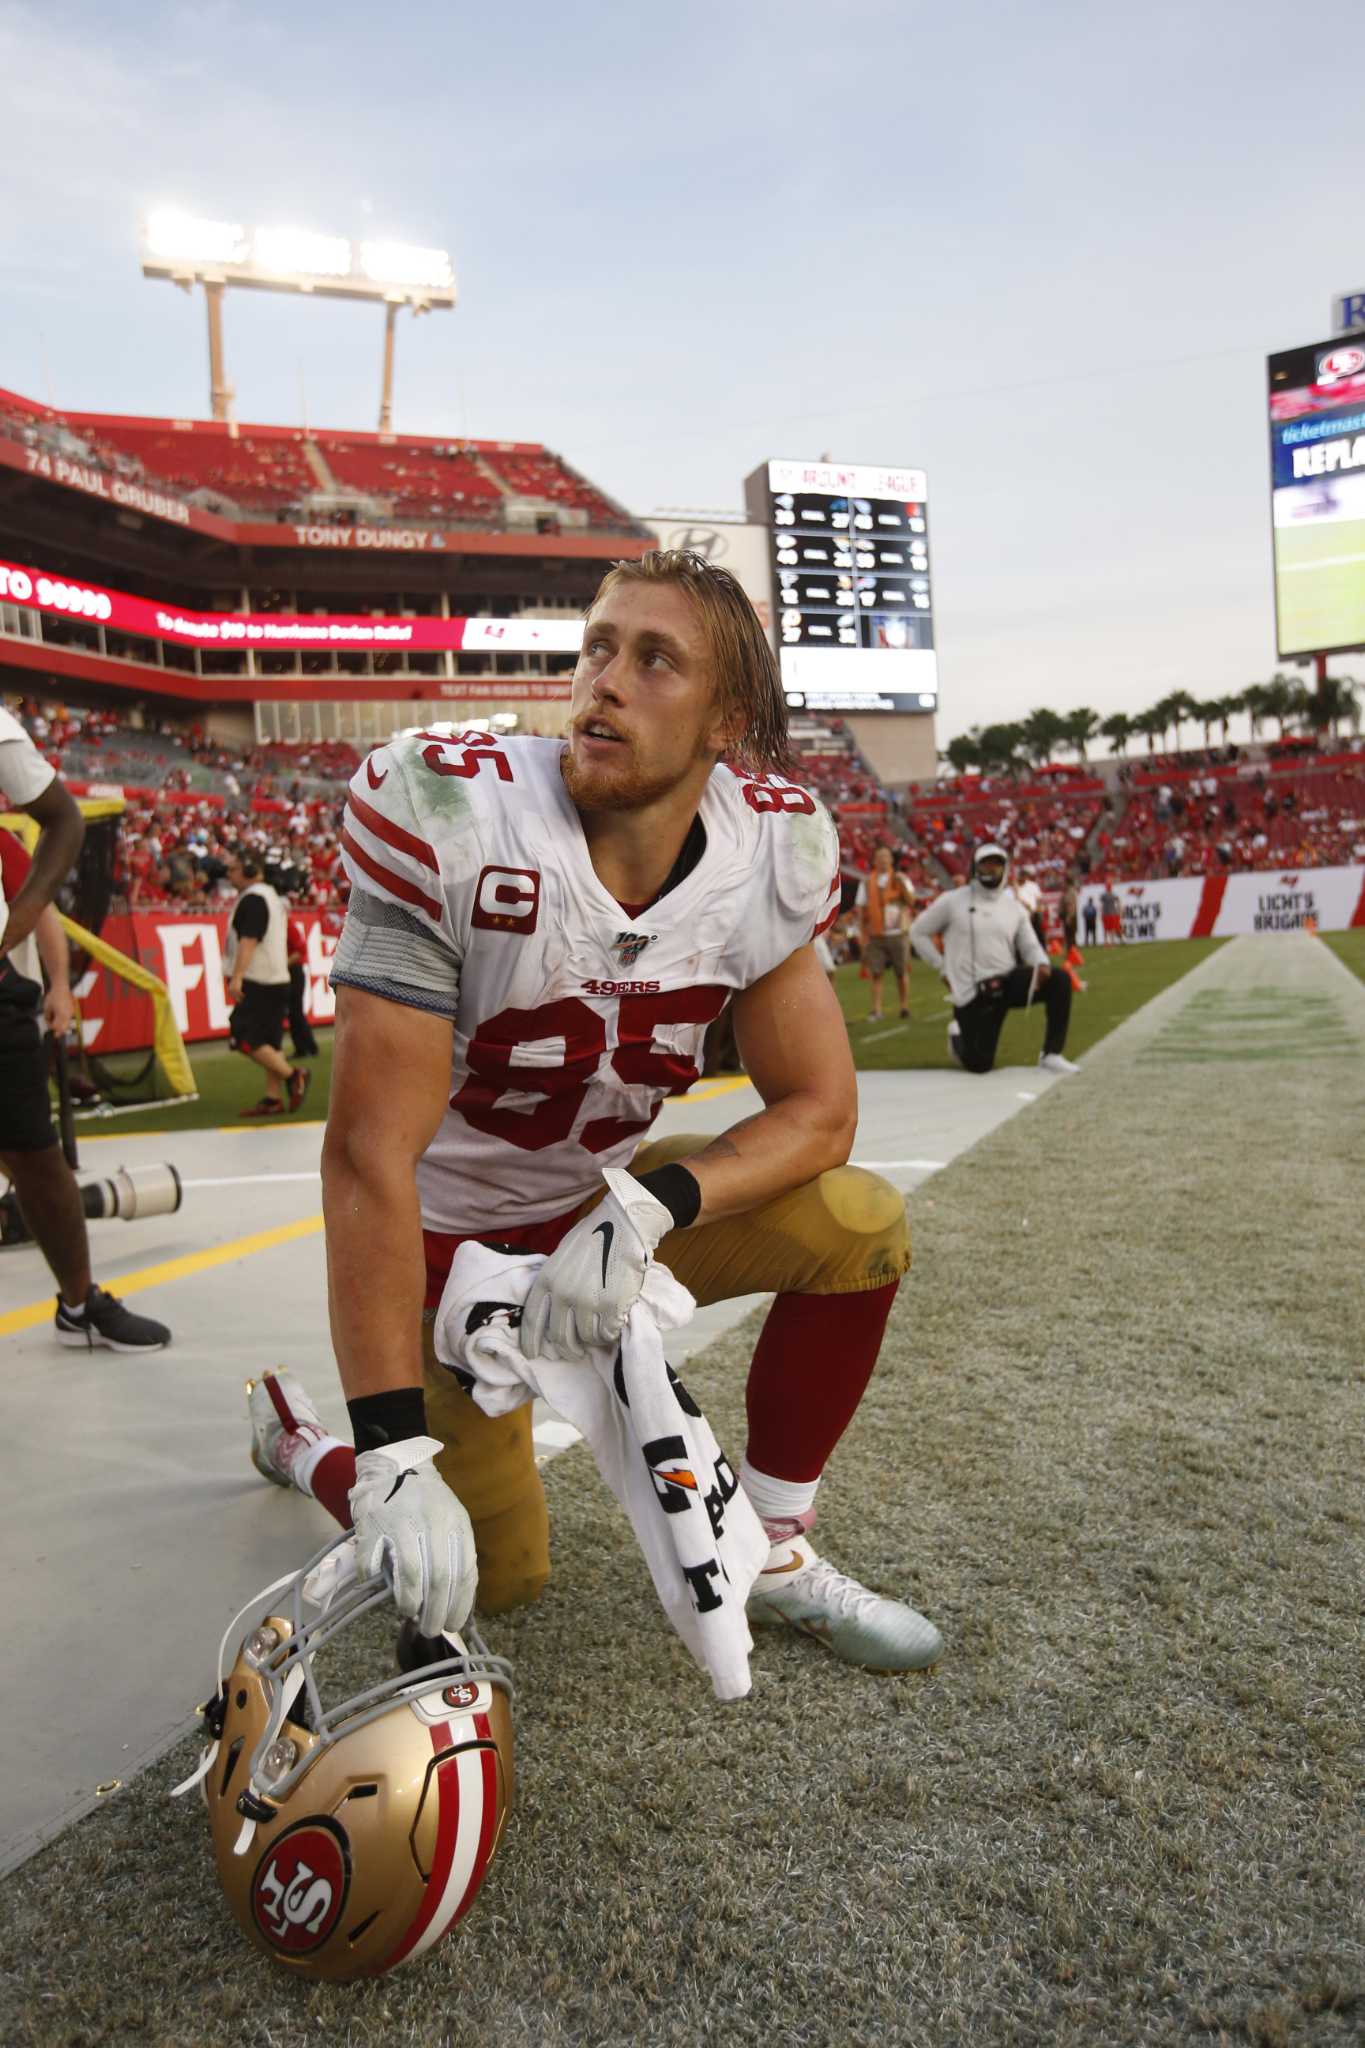 It seems George Kittle had a lovely time at the WWE Smackdown.